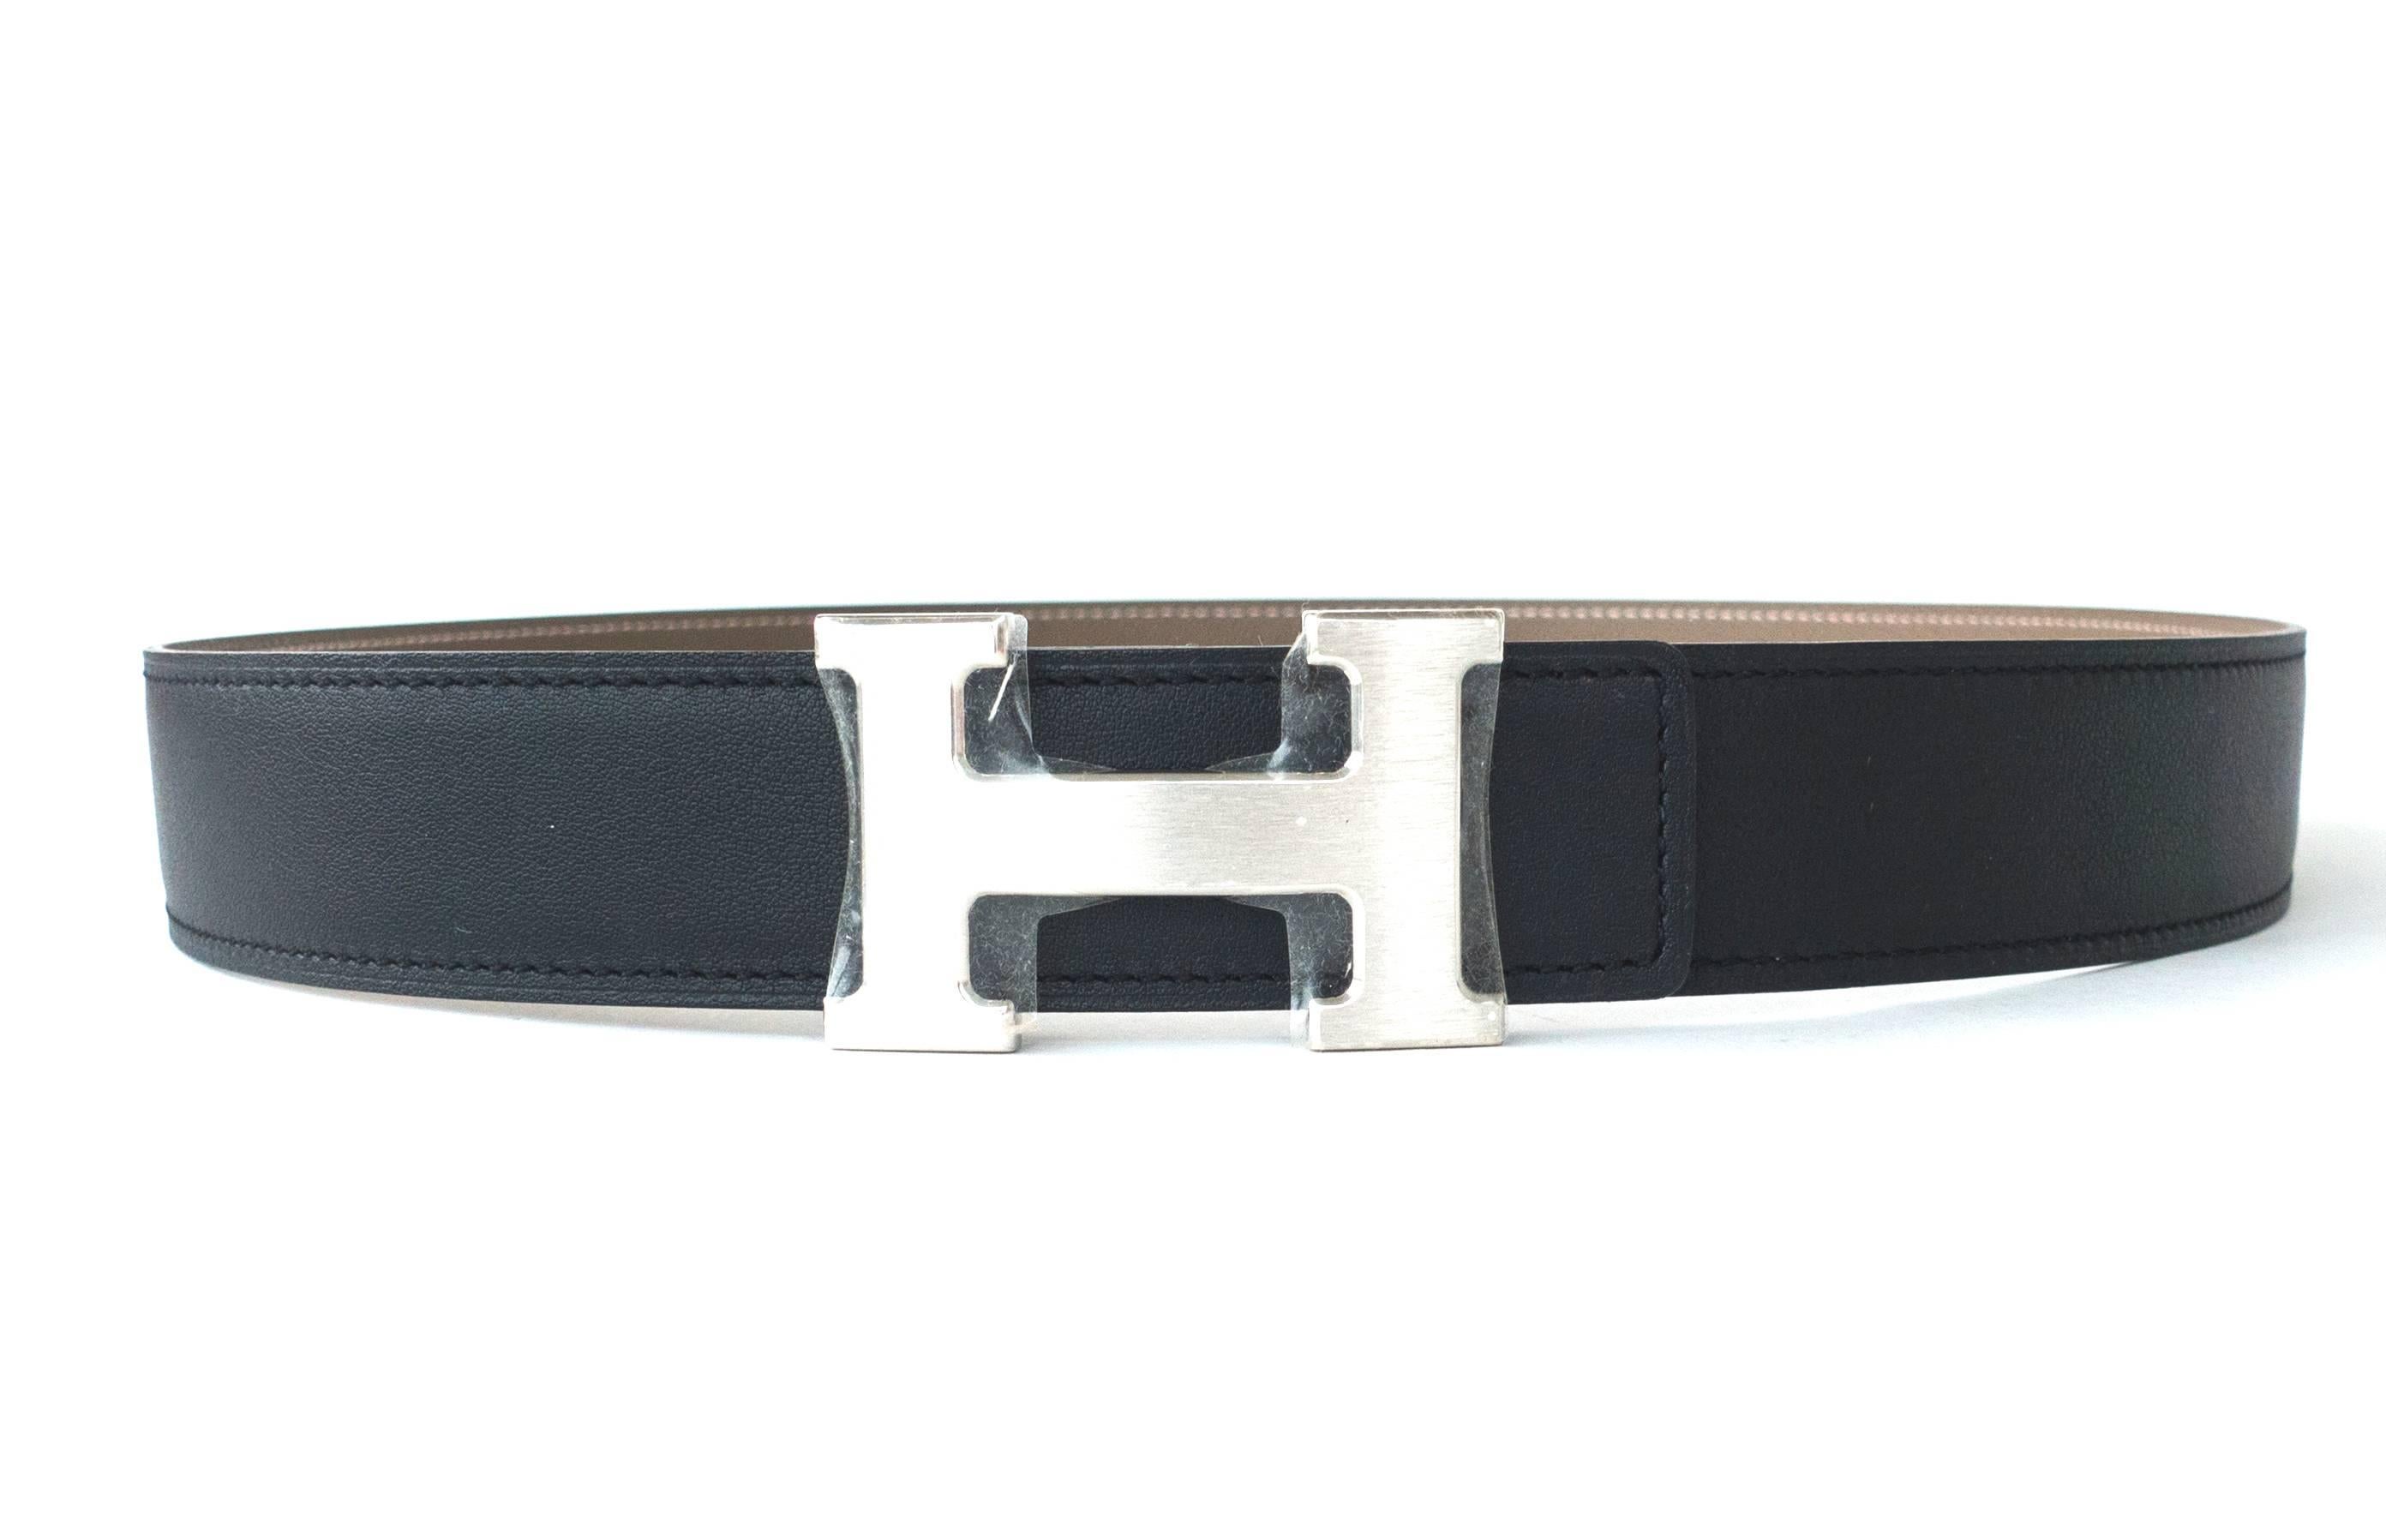 Hermes Etoupe Black 85cm Epsom Swift H Buckle Constance Belt Kit Classic 85cm
Store fresh. Pristine condition.
Perfect gift! Comes full set with Hermes belt strap, belt buckle, sleeper for belt buckle, and orange Hermes belt box.
The most coveted